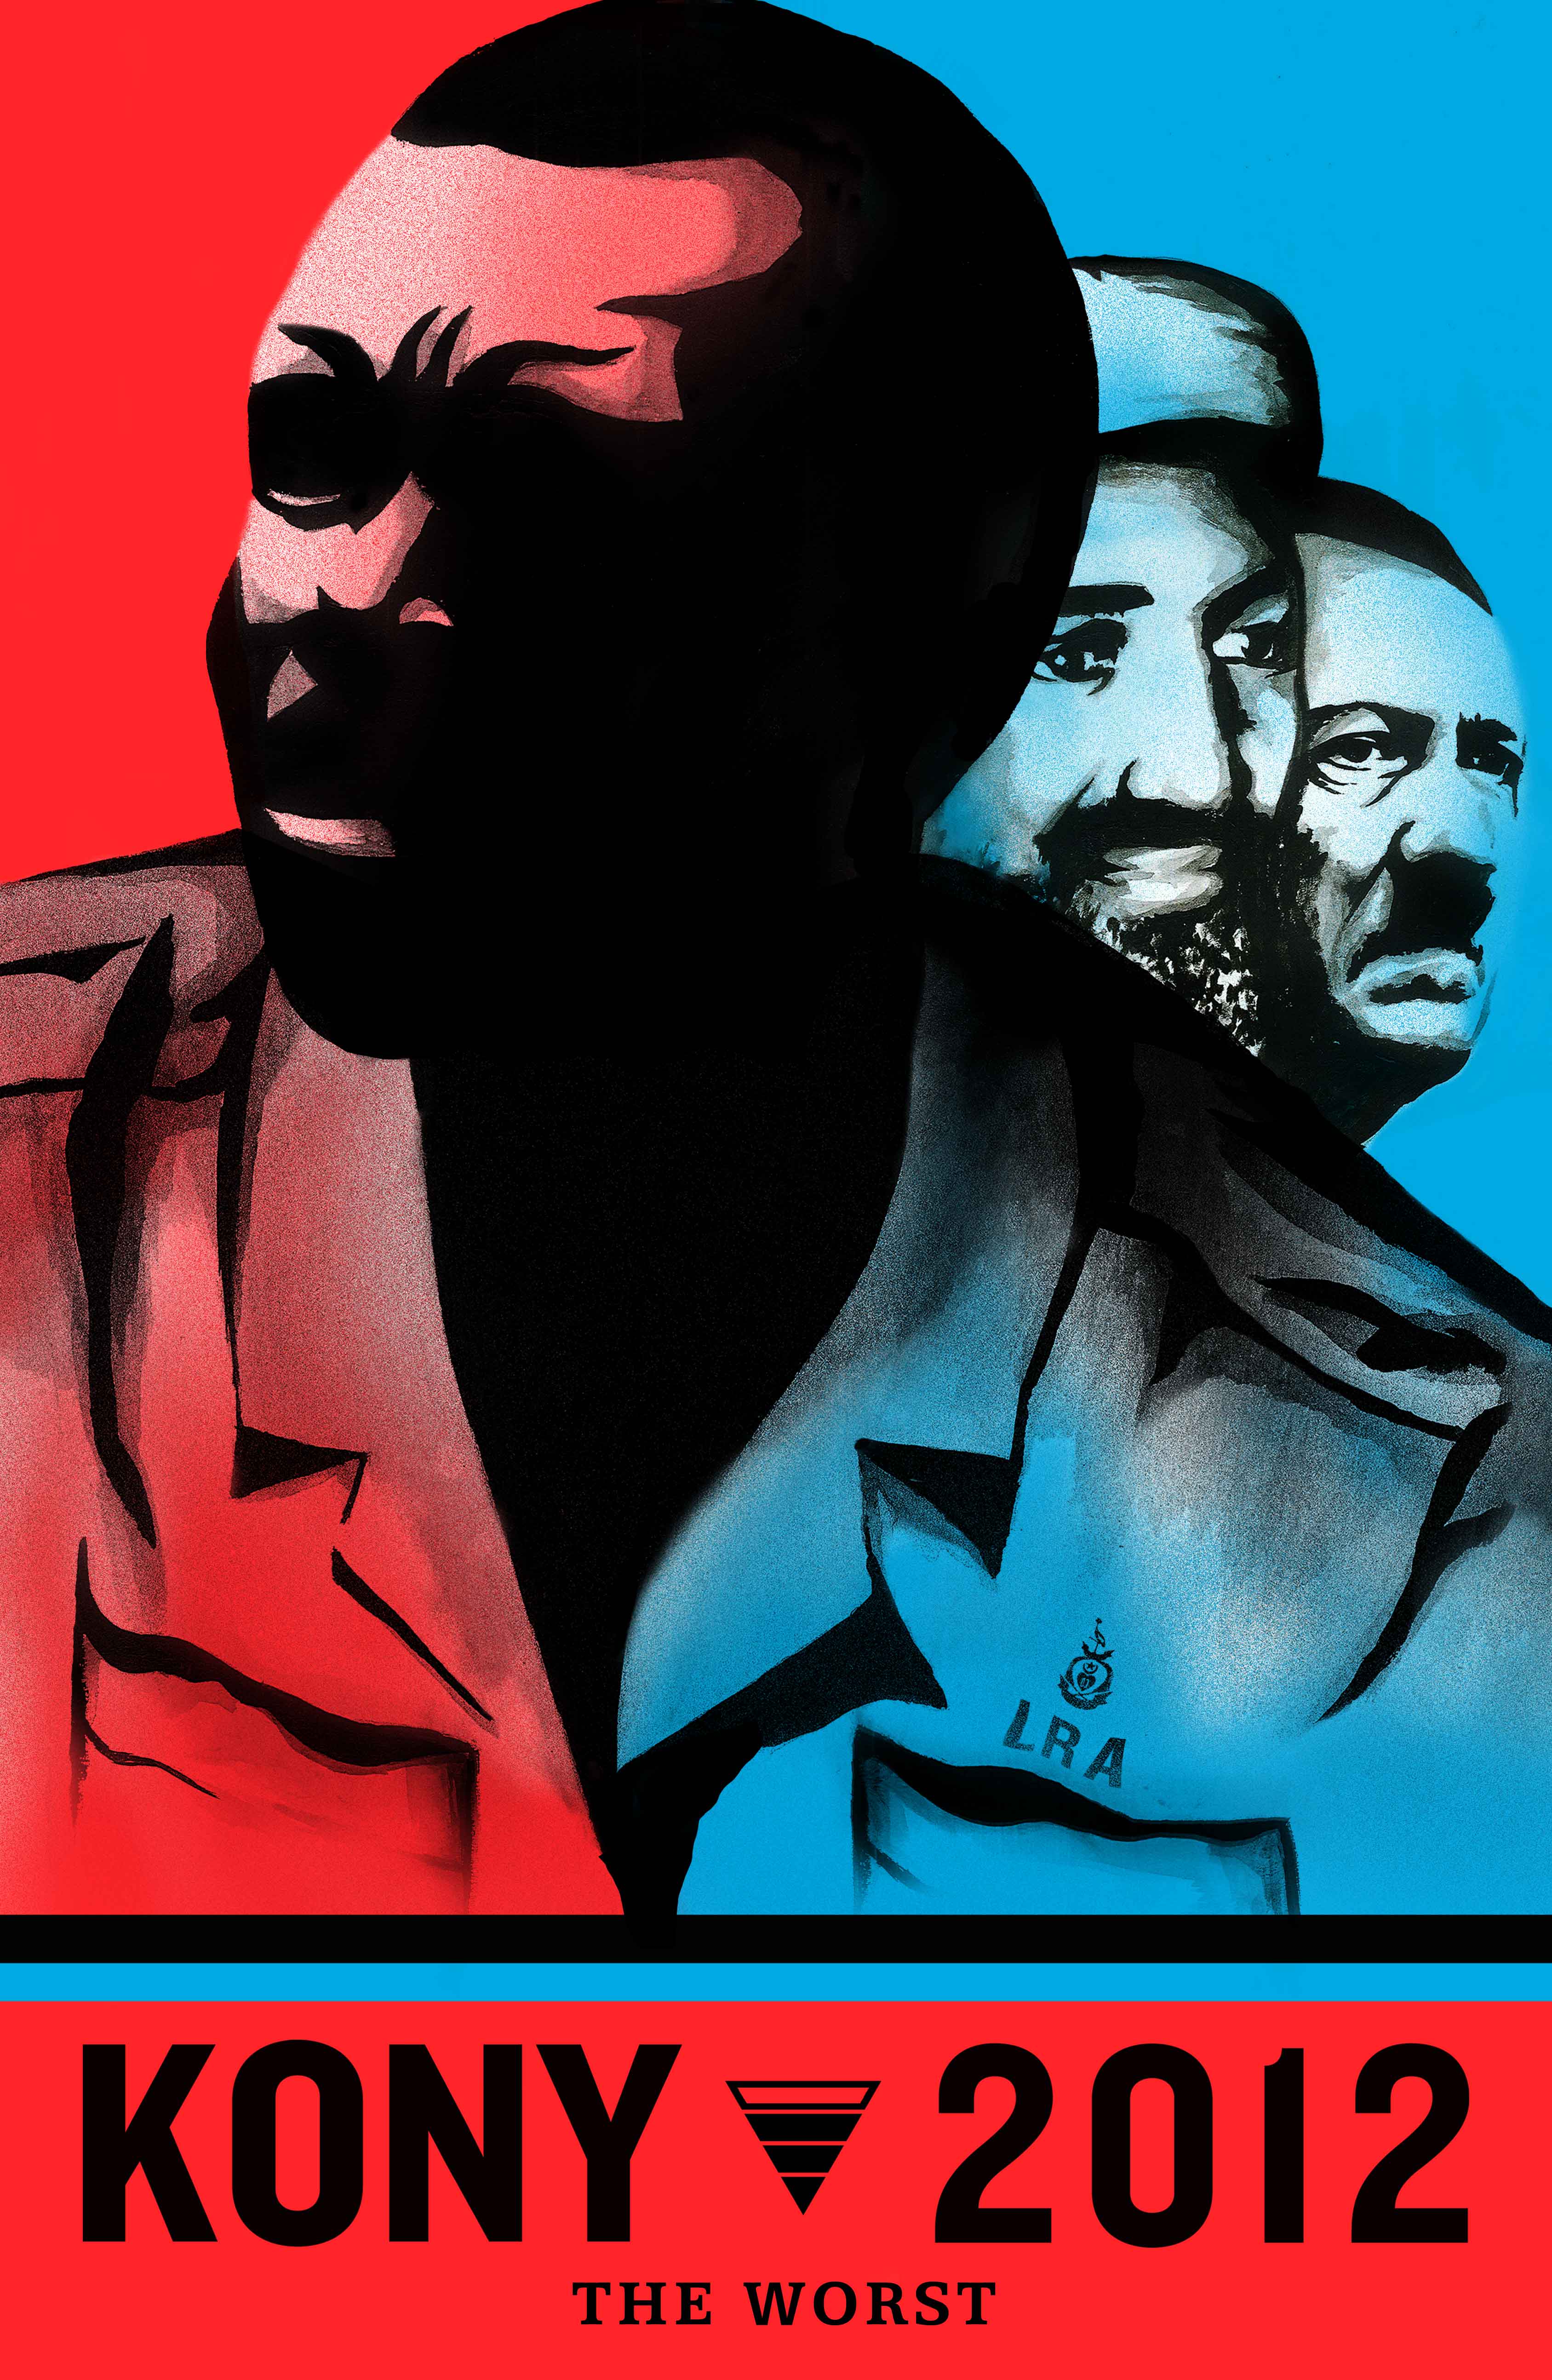 Invisible Children's downloadable Stop Kony poster